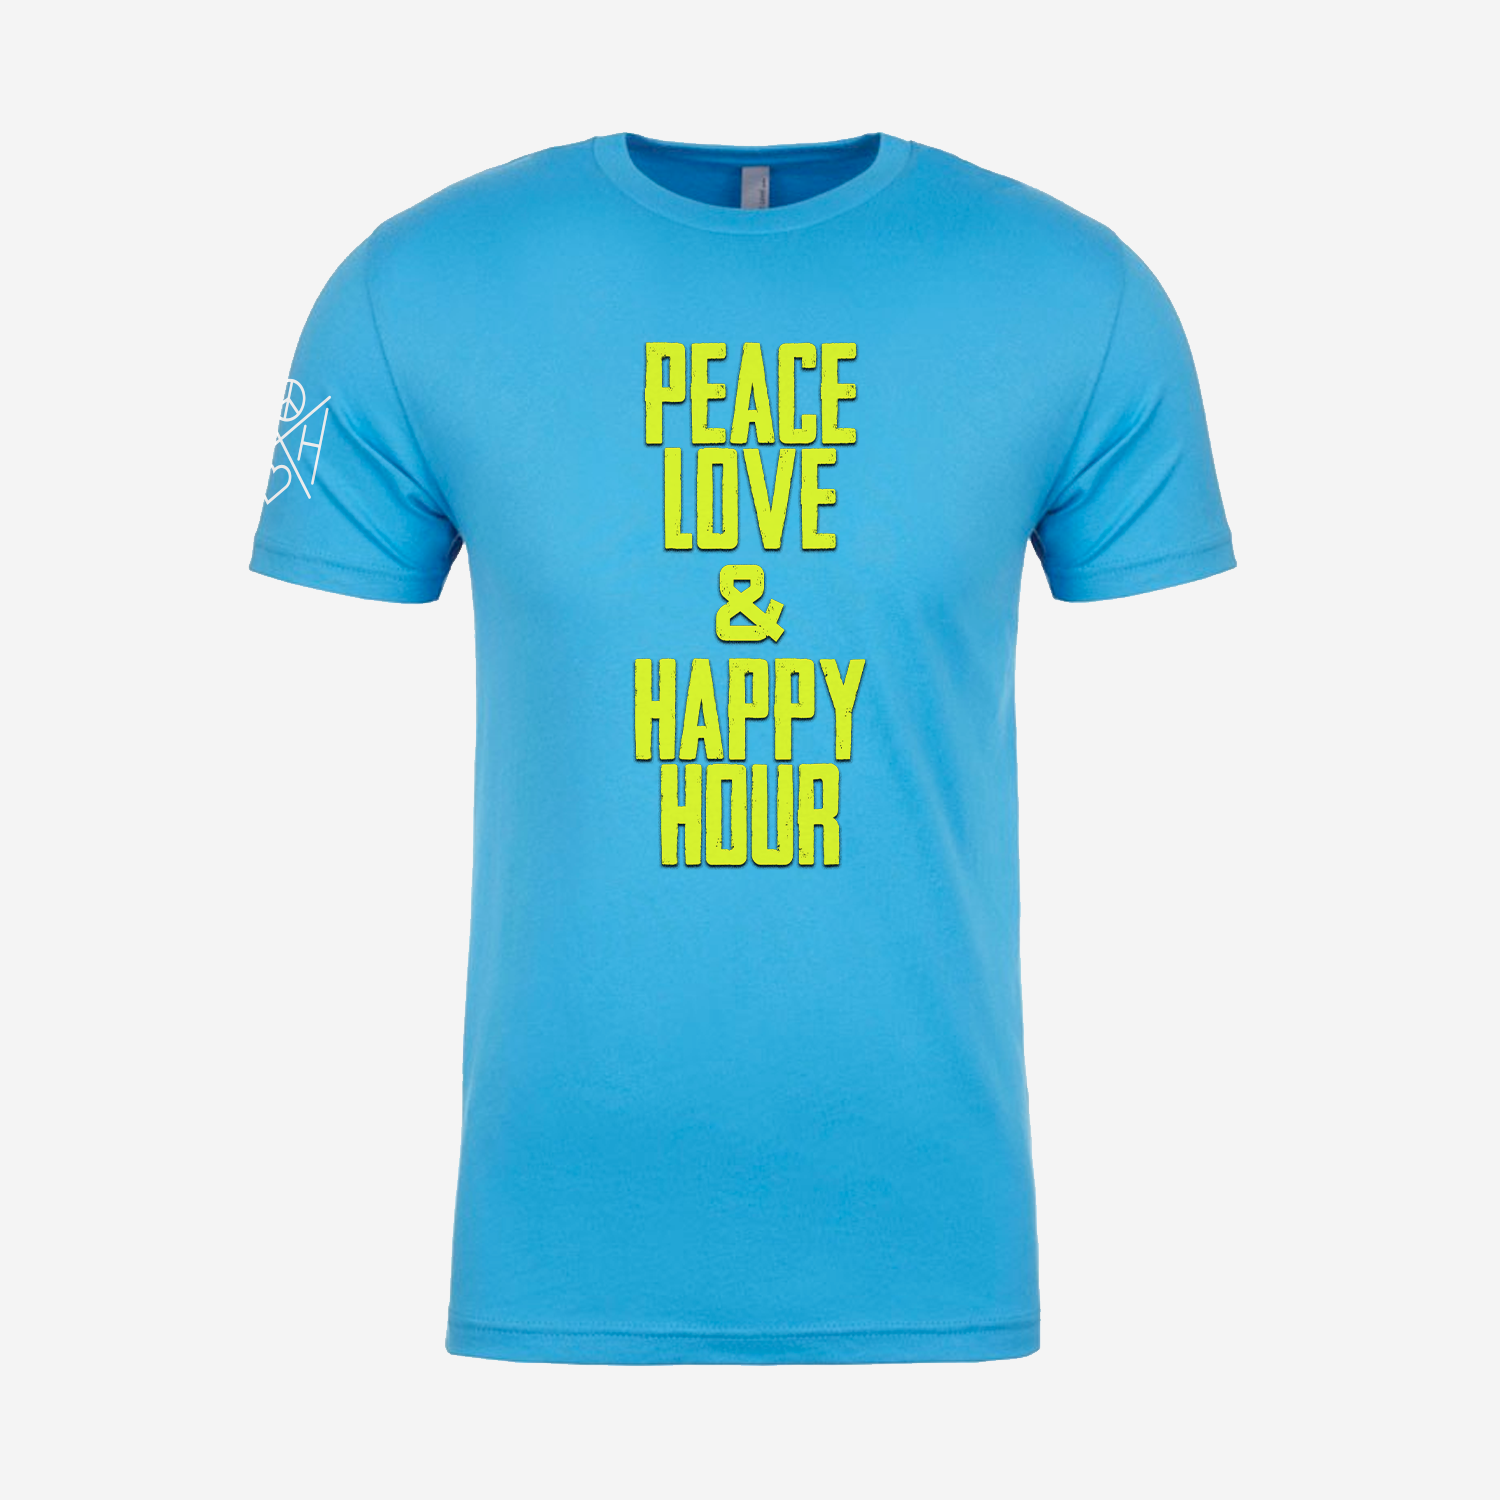 Good Vibes T-Shirt and Love – Happy Hour Peace